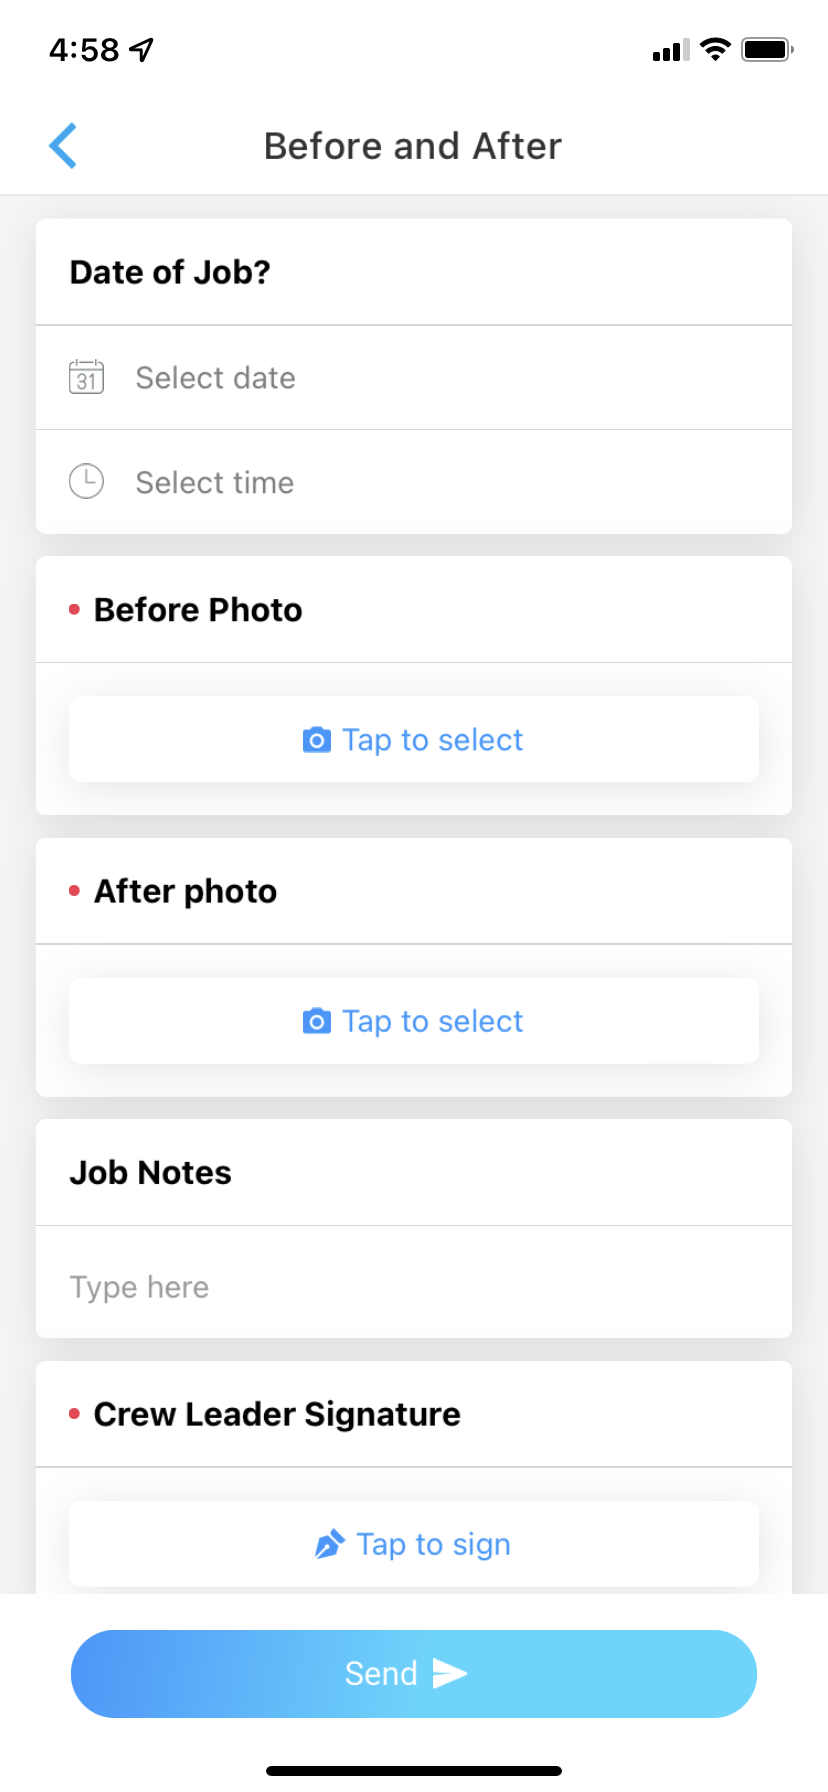 Before and after form mobile